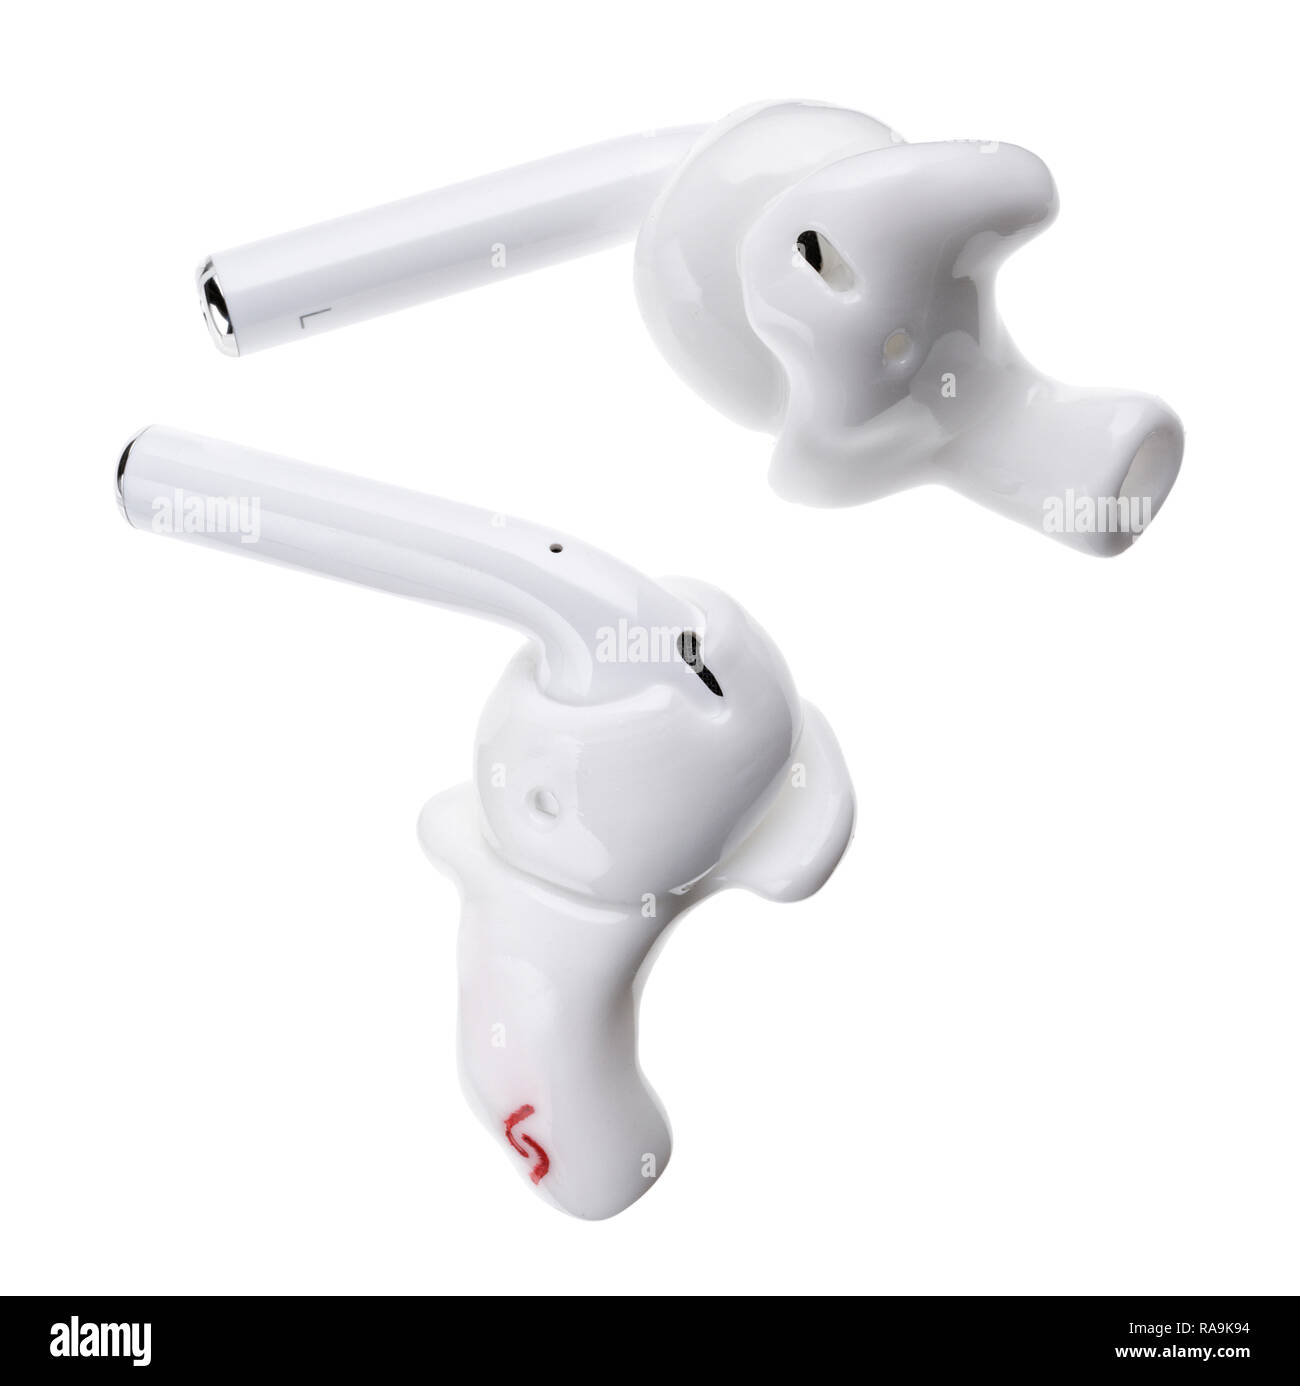 Apple Airpod wireless earbuds with Snugs fitted moldings. Stock Photo